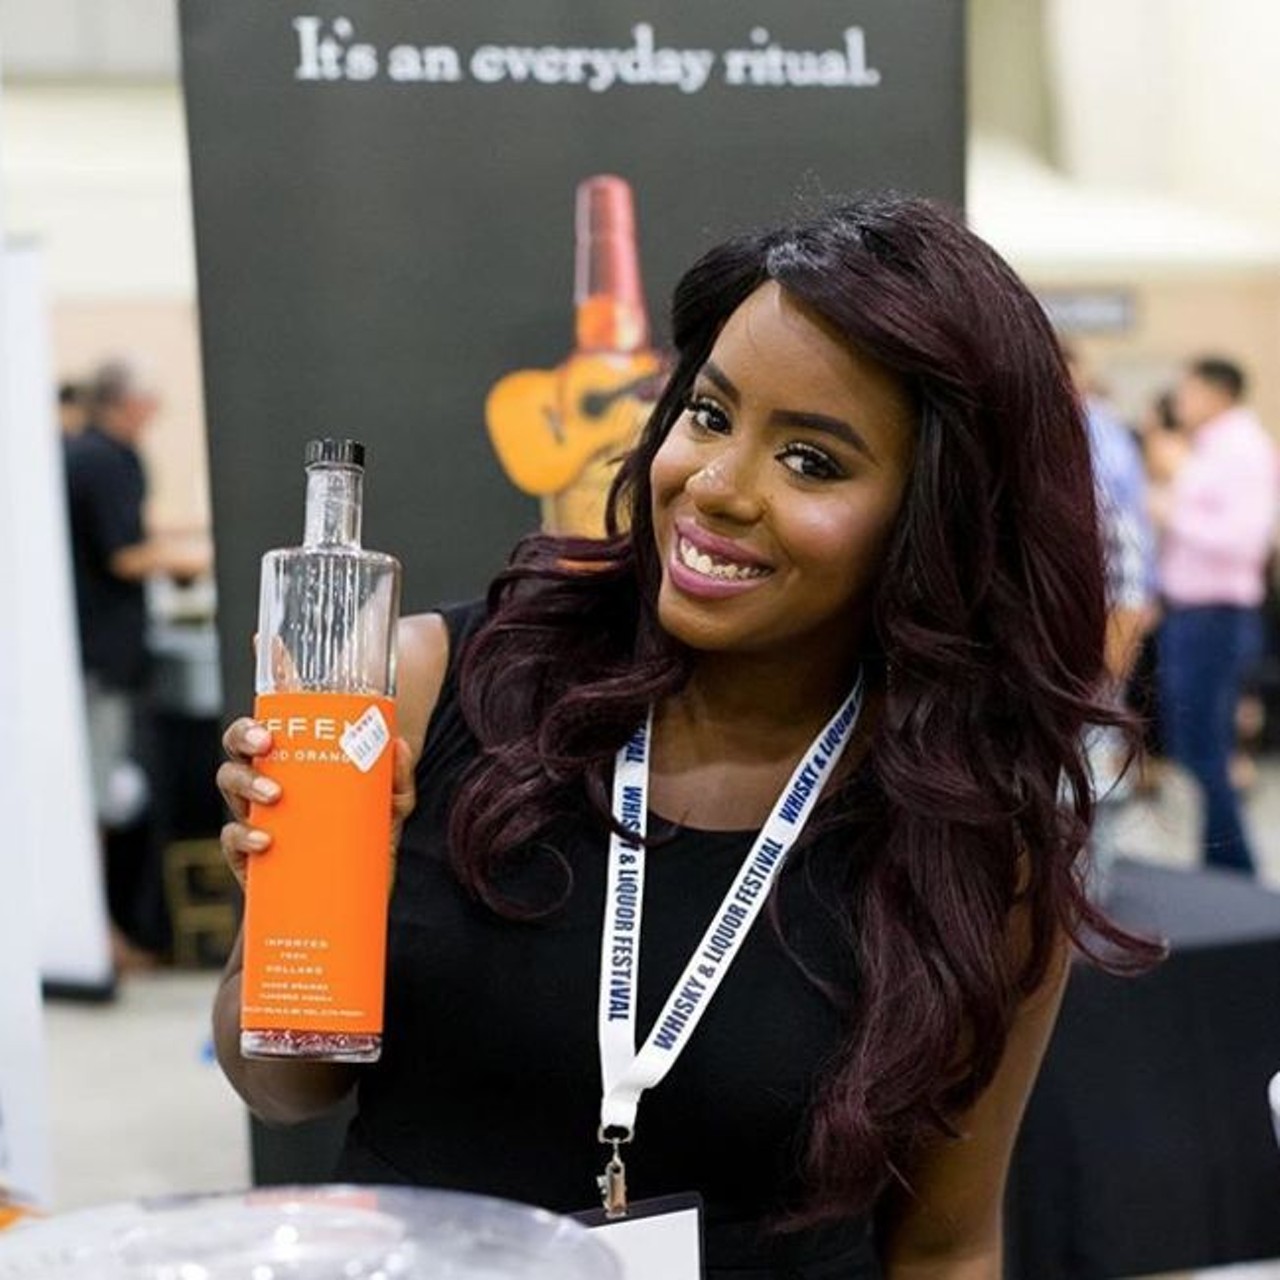 Oct. 14, Whisky and Liquor Festival
3201 E Houston St., (210) 646-9992, facebook.com
Do not pregame. If you can hold your liquor, you&#146;ll have a blast at this boozy festival. You might even forget you&#146;re inside Freeman Coliseum.
Photo via Instagram, whiskyliquorfest